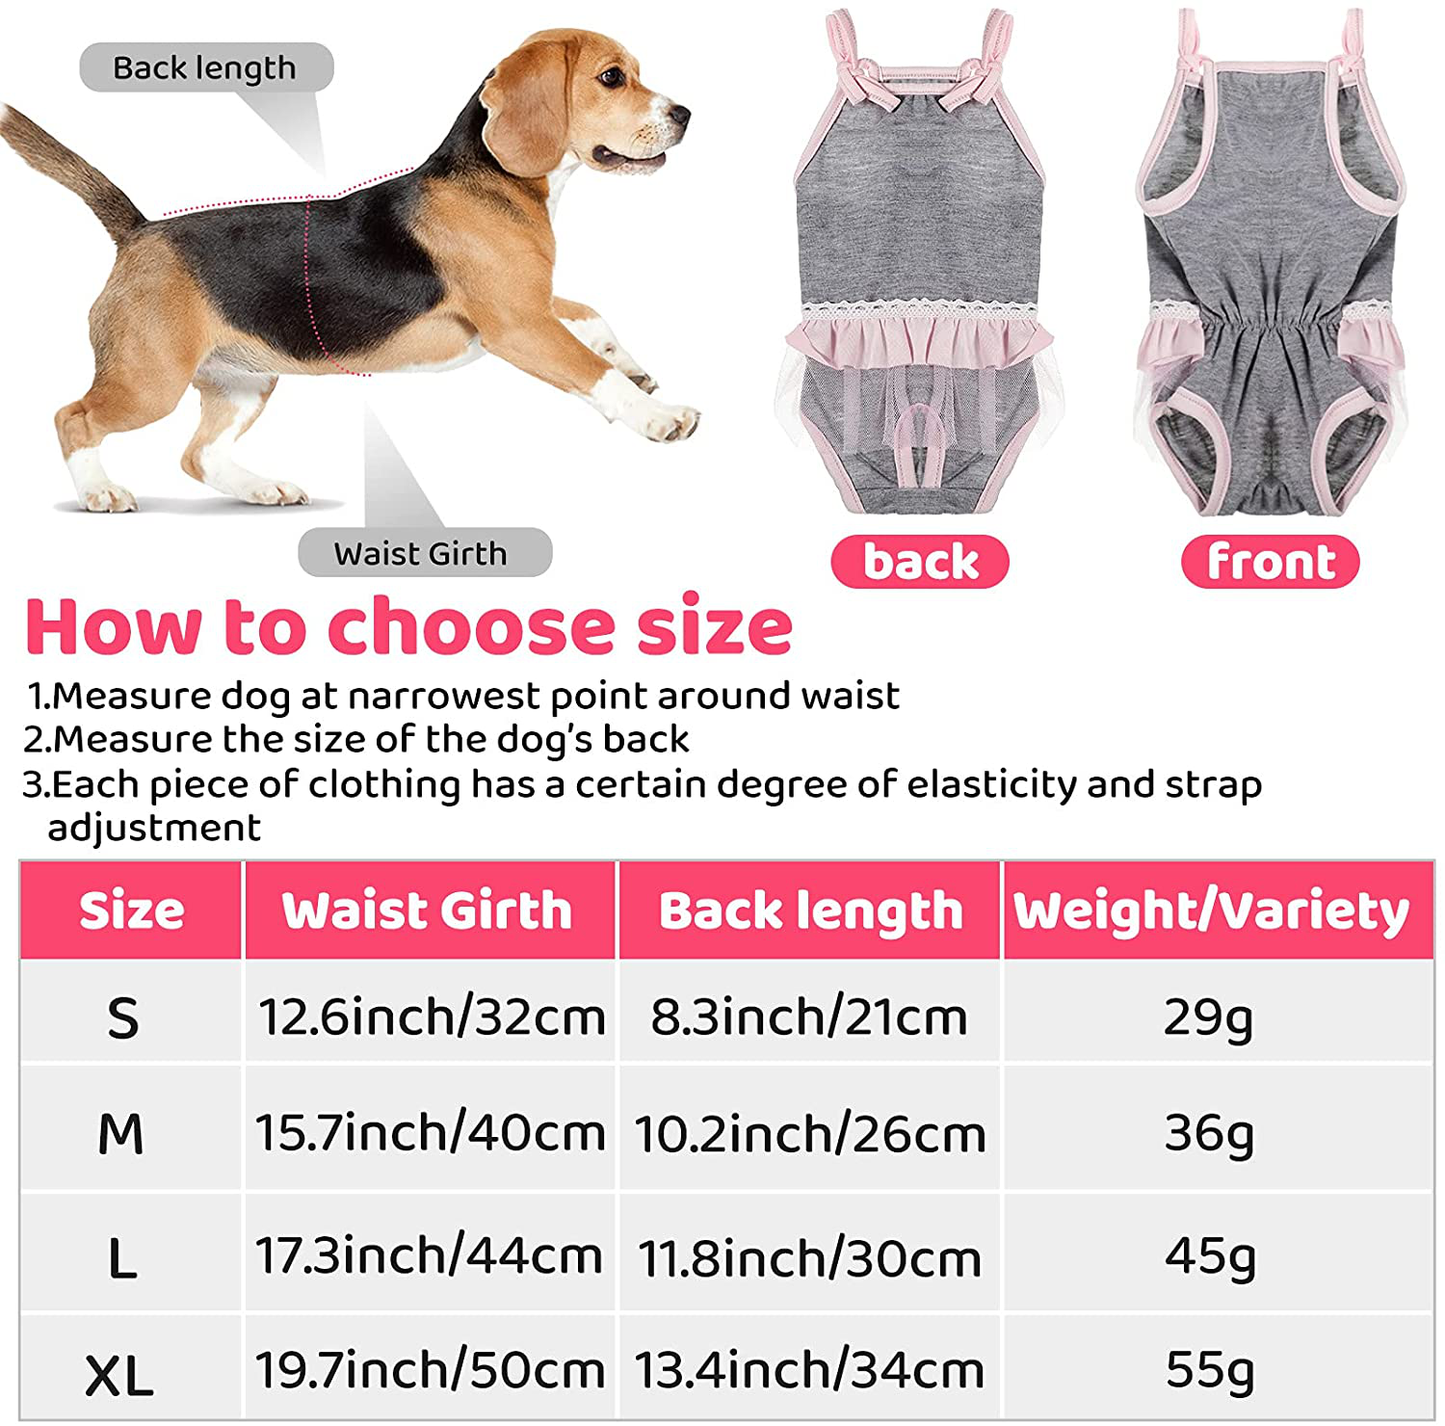 Frienda 3 Pieces Dog Diaper, Dog Sanitary with Adjustable Strap Suspender Pants, Jumpsuits Suspenders for Girl Dog Teddy Young Corgi French Bulldog Puppy